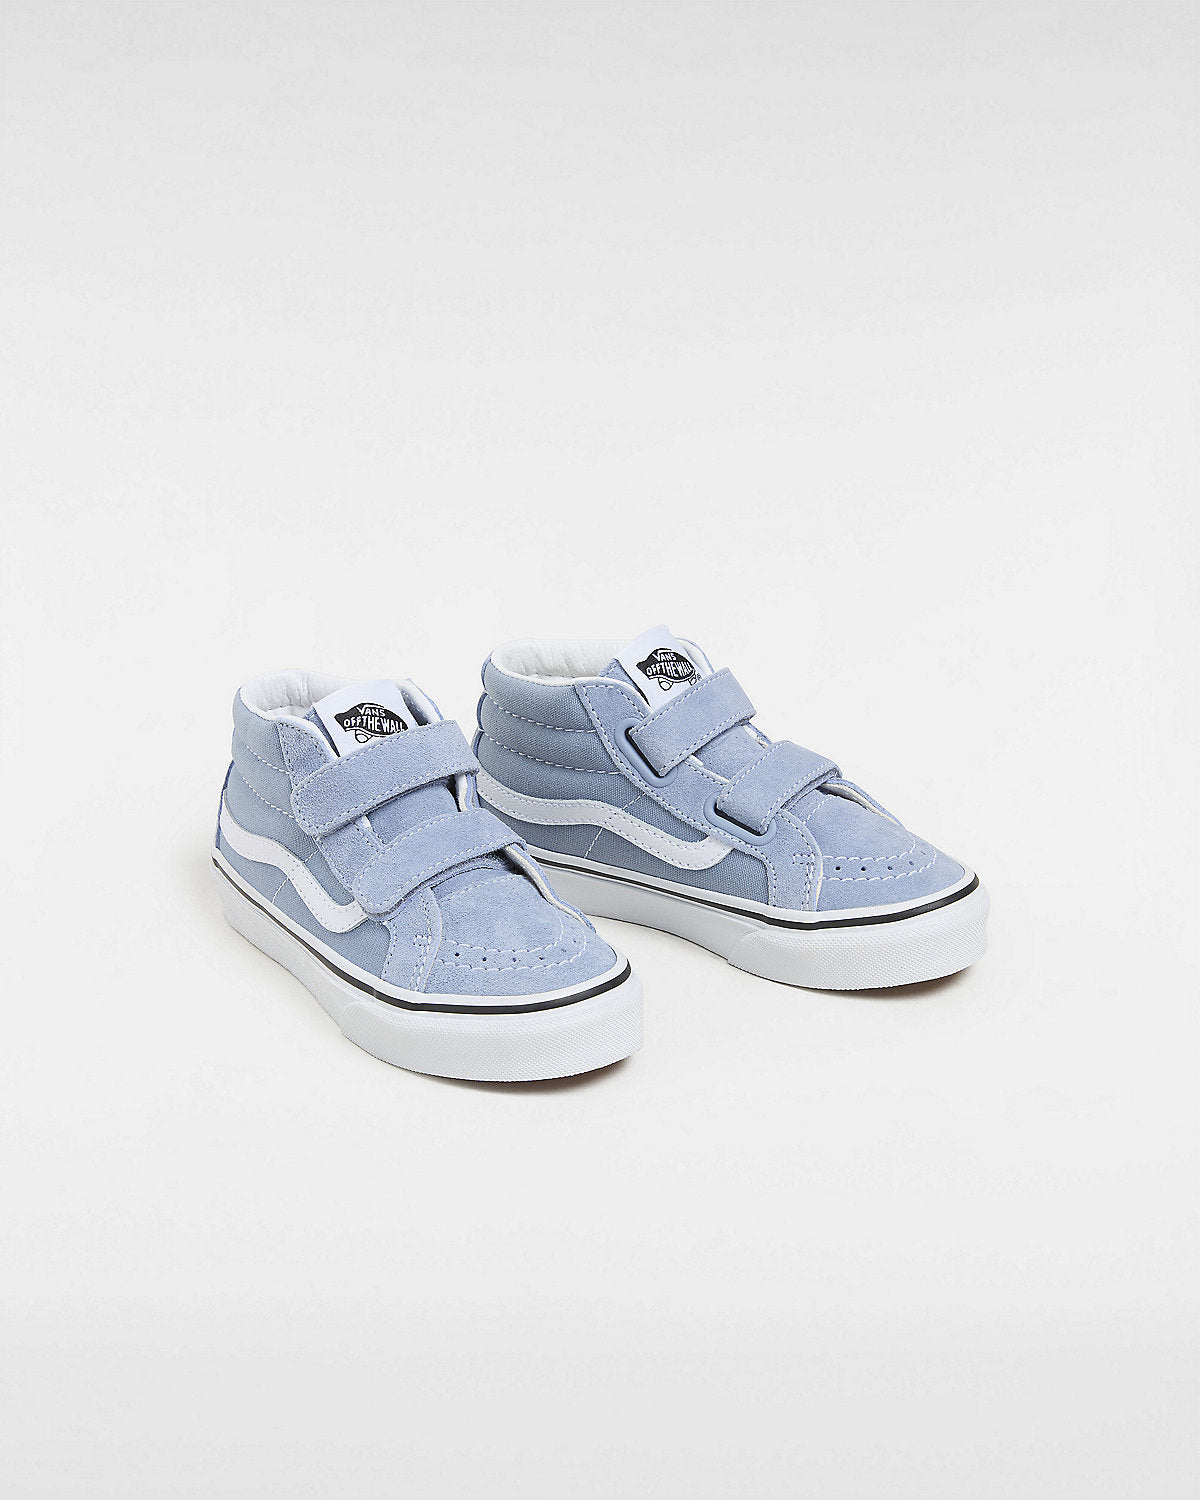 VANS Kids Sk8-Mid Reissue V Color Theory Trainers - Dusty Blue